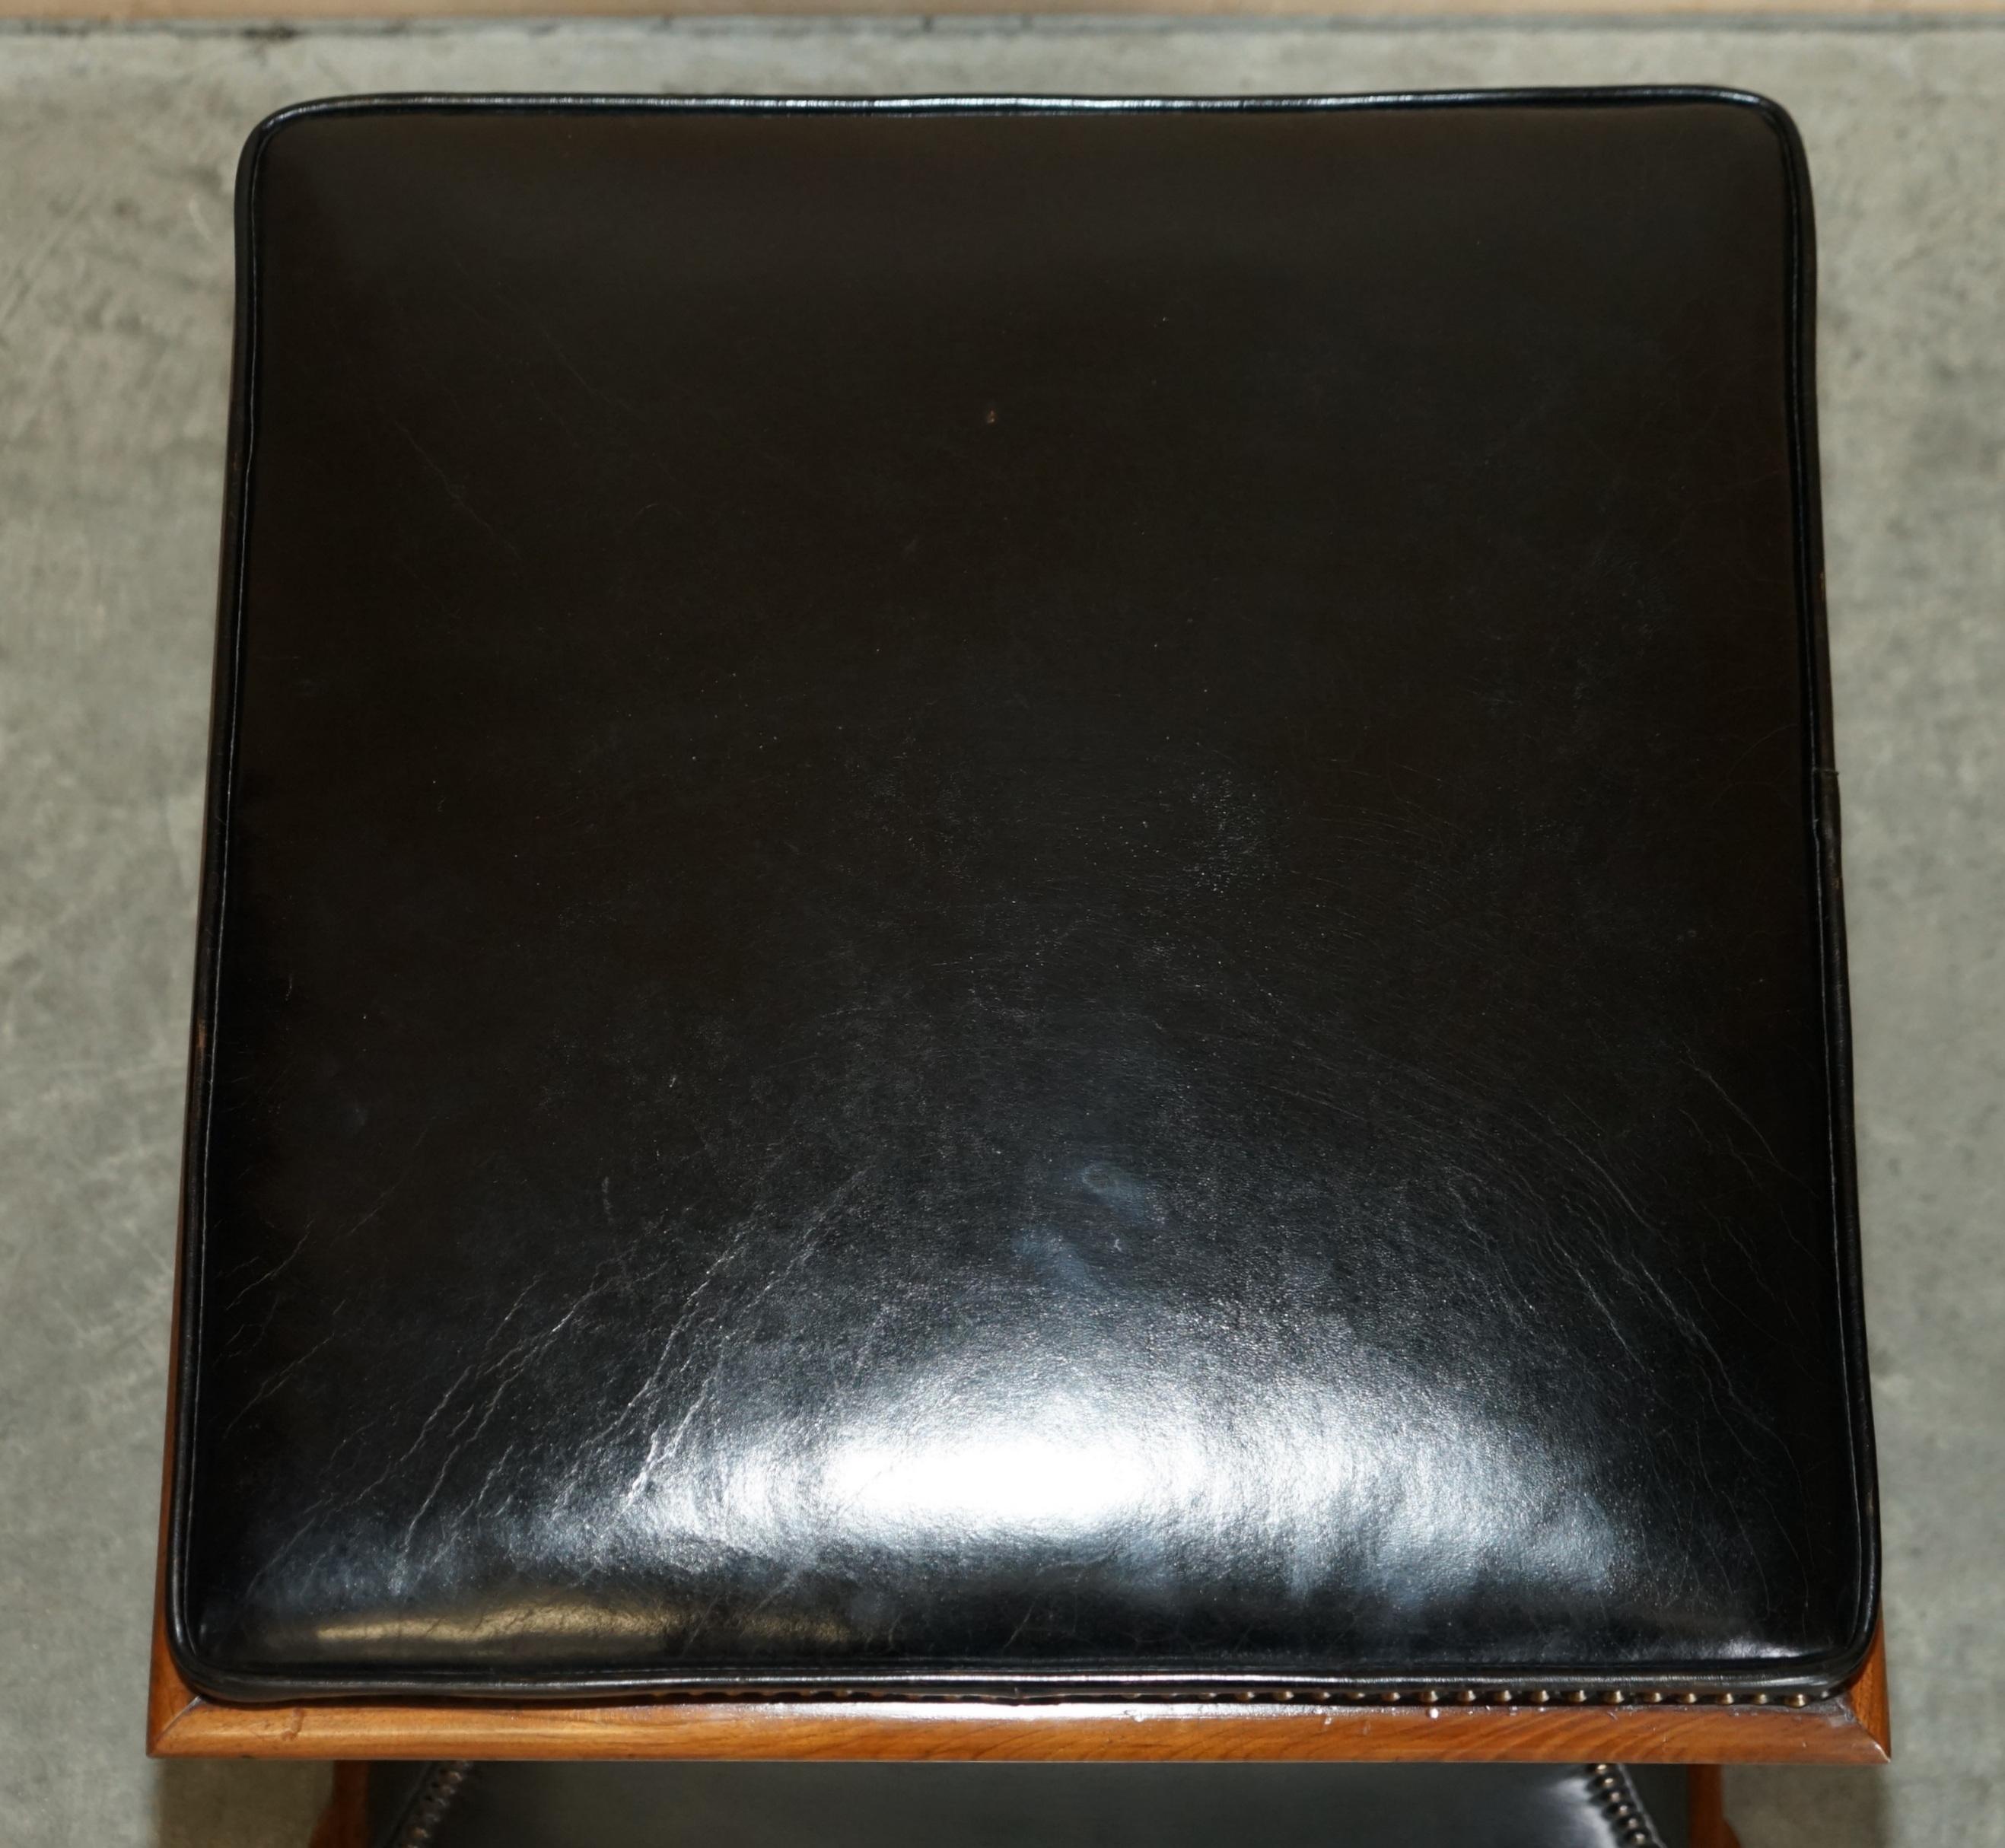 English EXQUISITE VICTORIAN CiRCA 1860 TAN BLACK LEATHER OTTOMAN STOOL FOOTSTOOL STORAGE For Sale